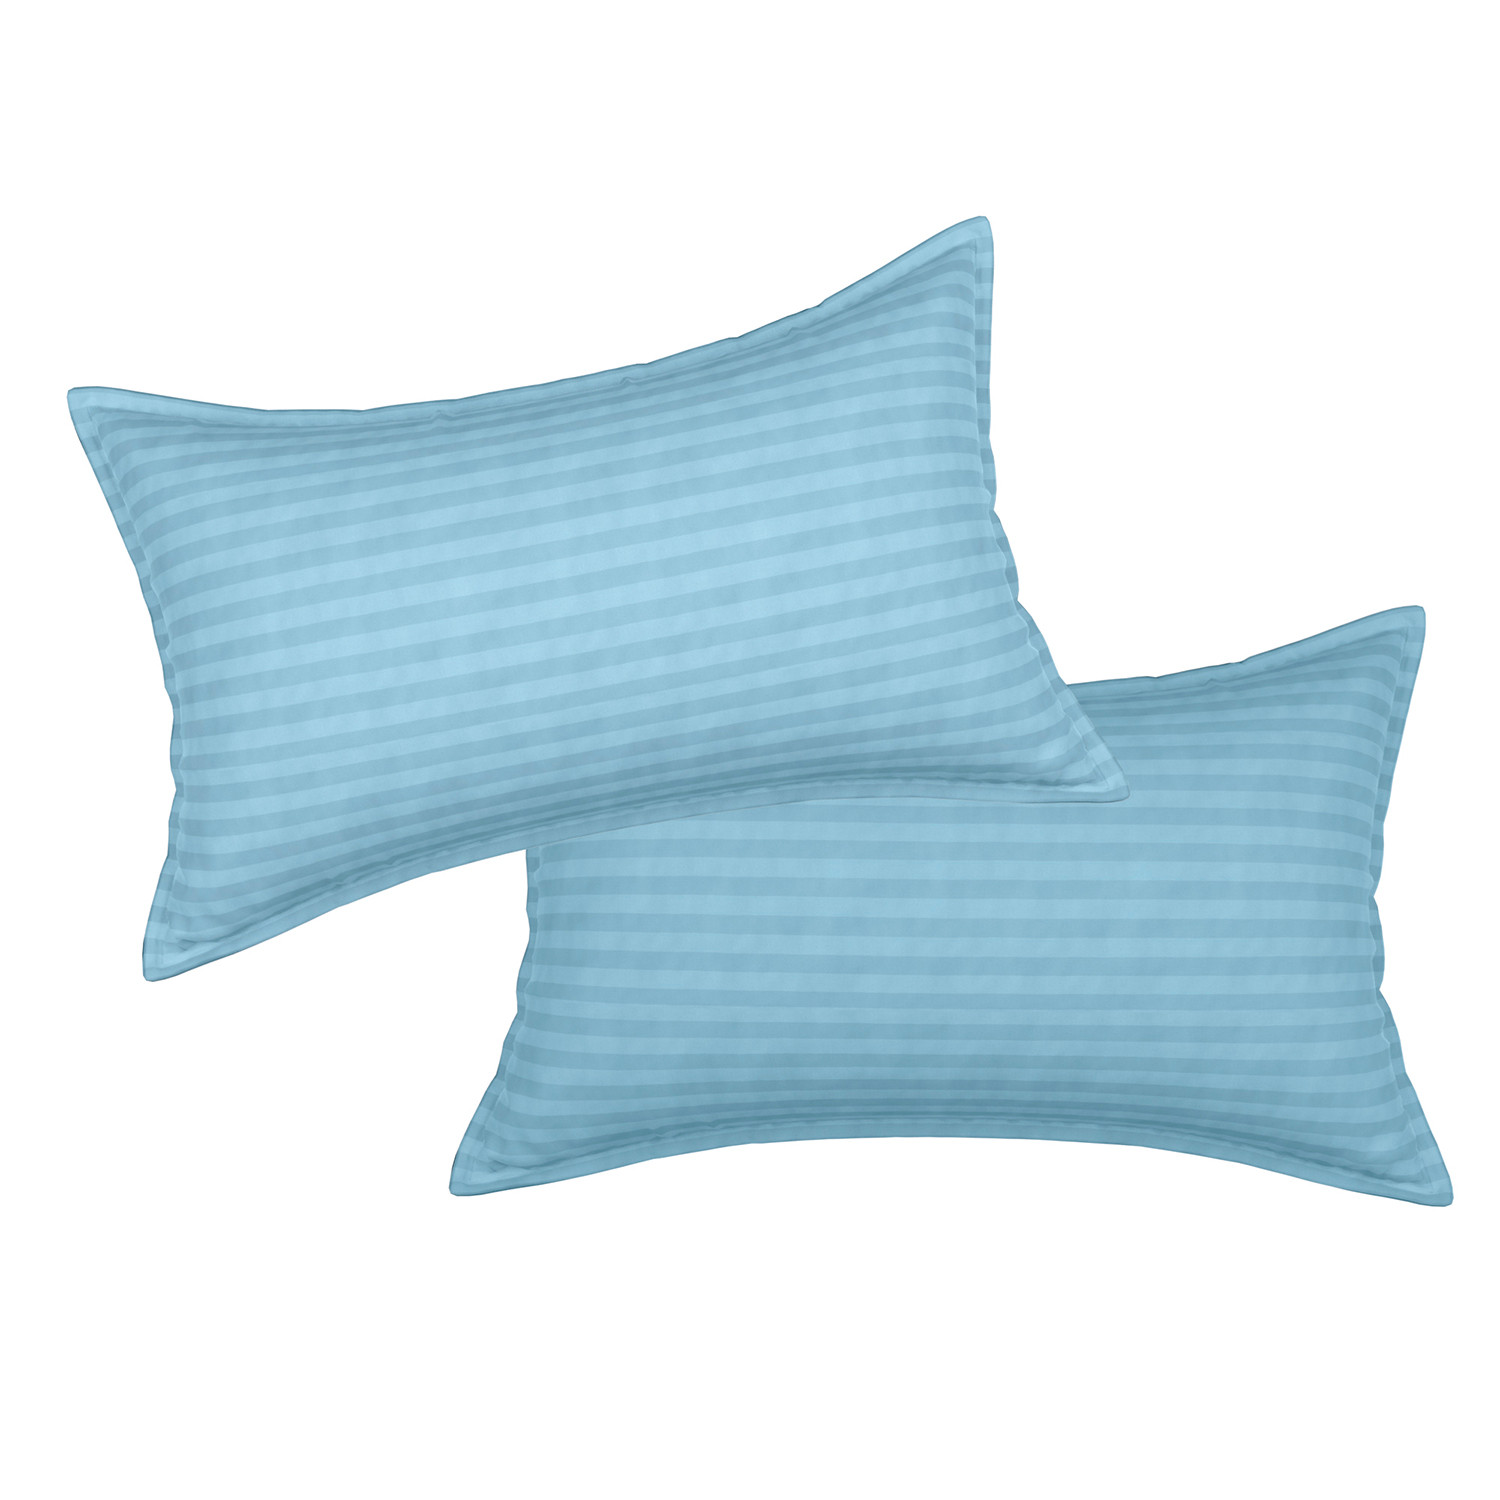 Kuber Industries Pillow Cover | Cotton Pillow Cover | Striped Pattern Pillow Cover | Soft Pillow Cover for Home | Pillow Cover for Bedroom| Sky Blue